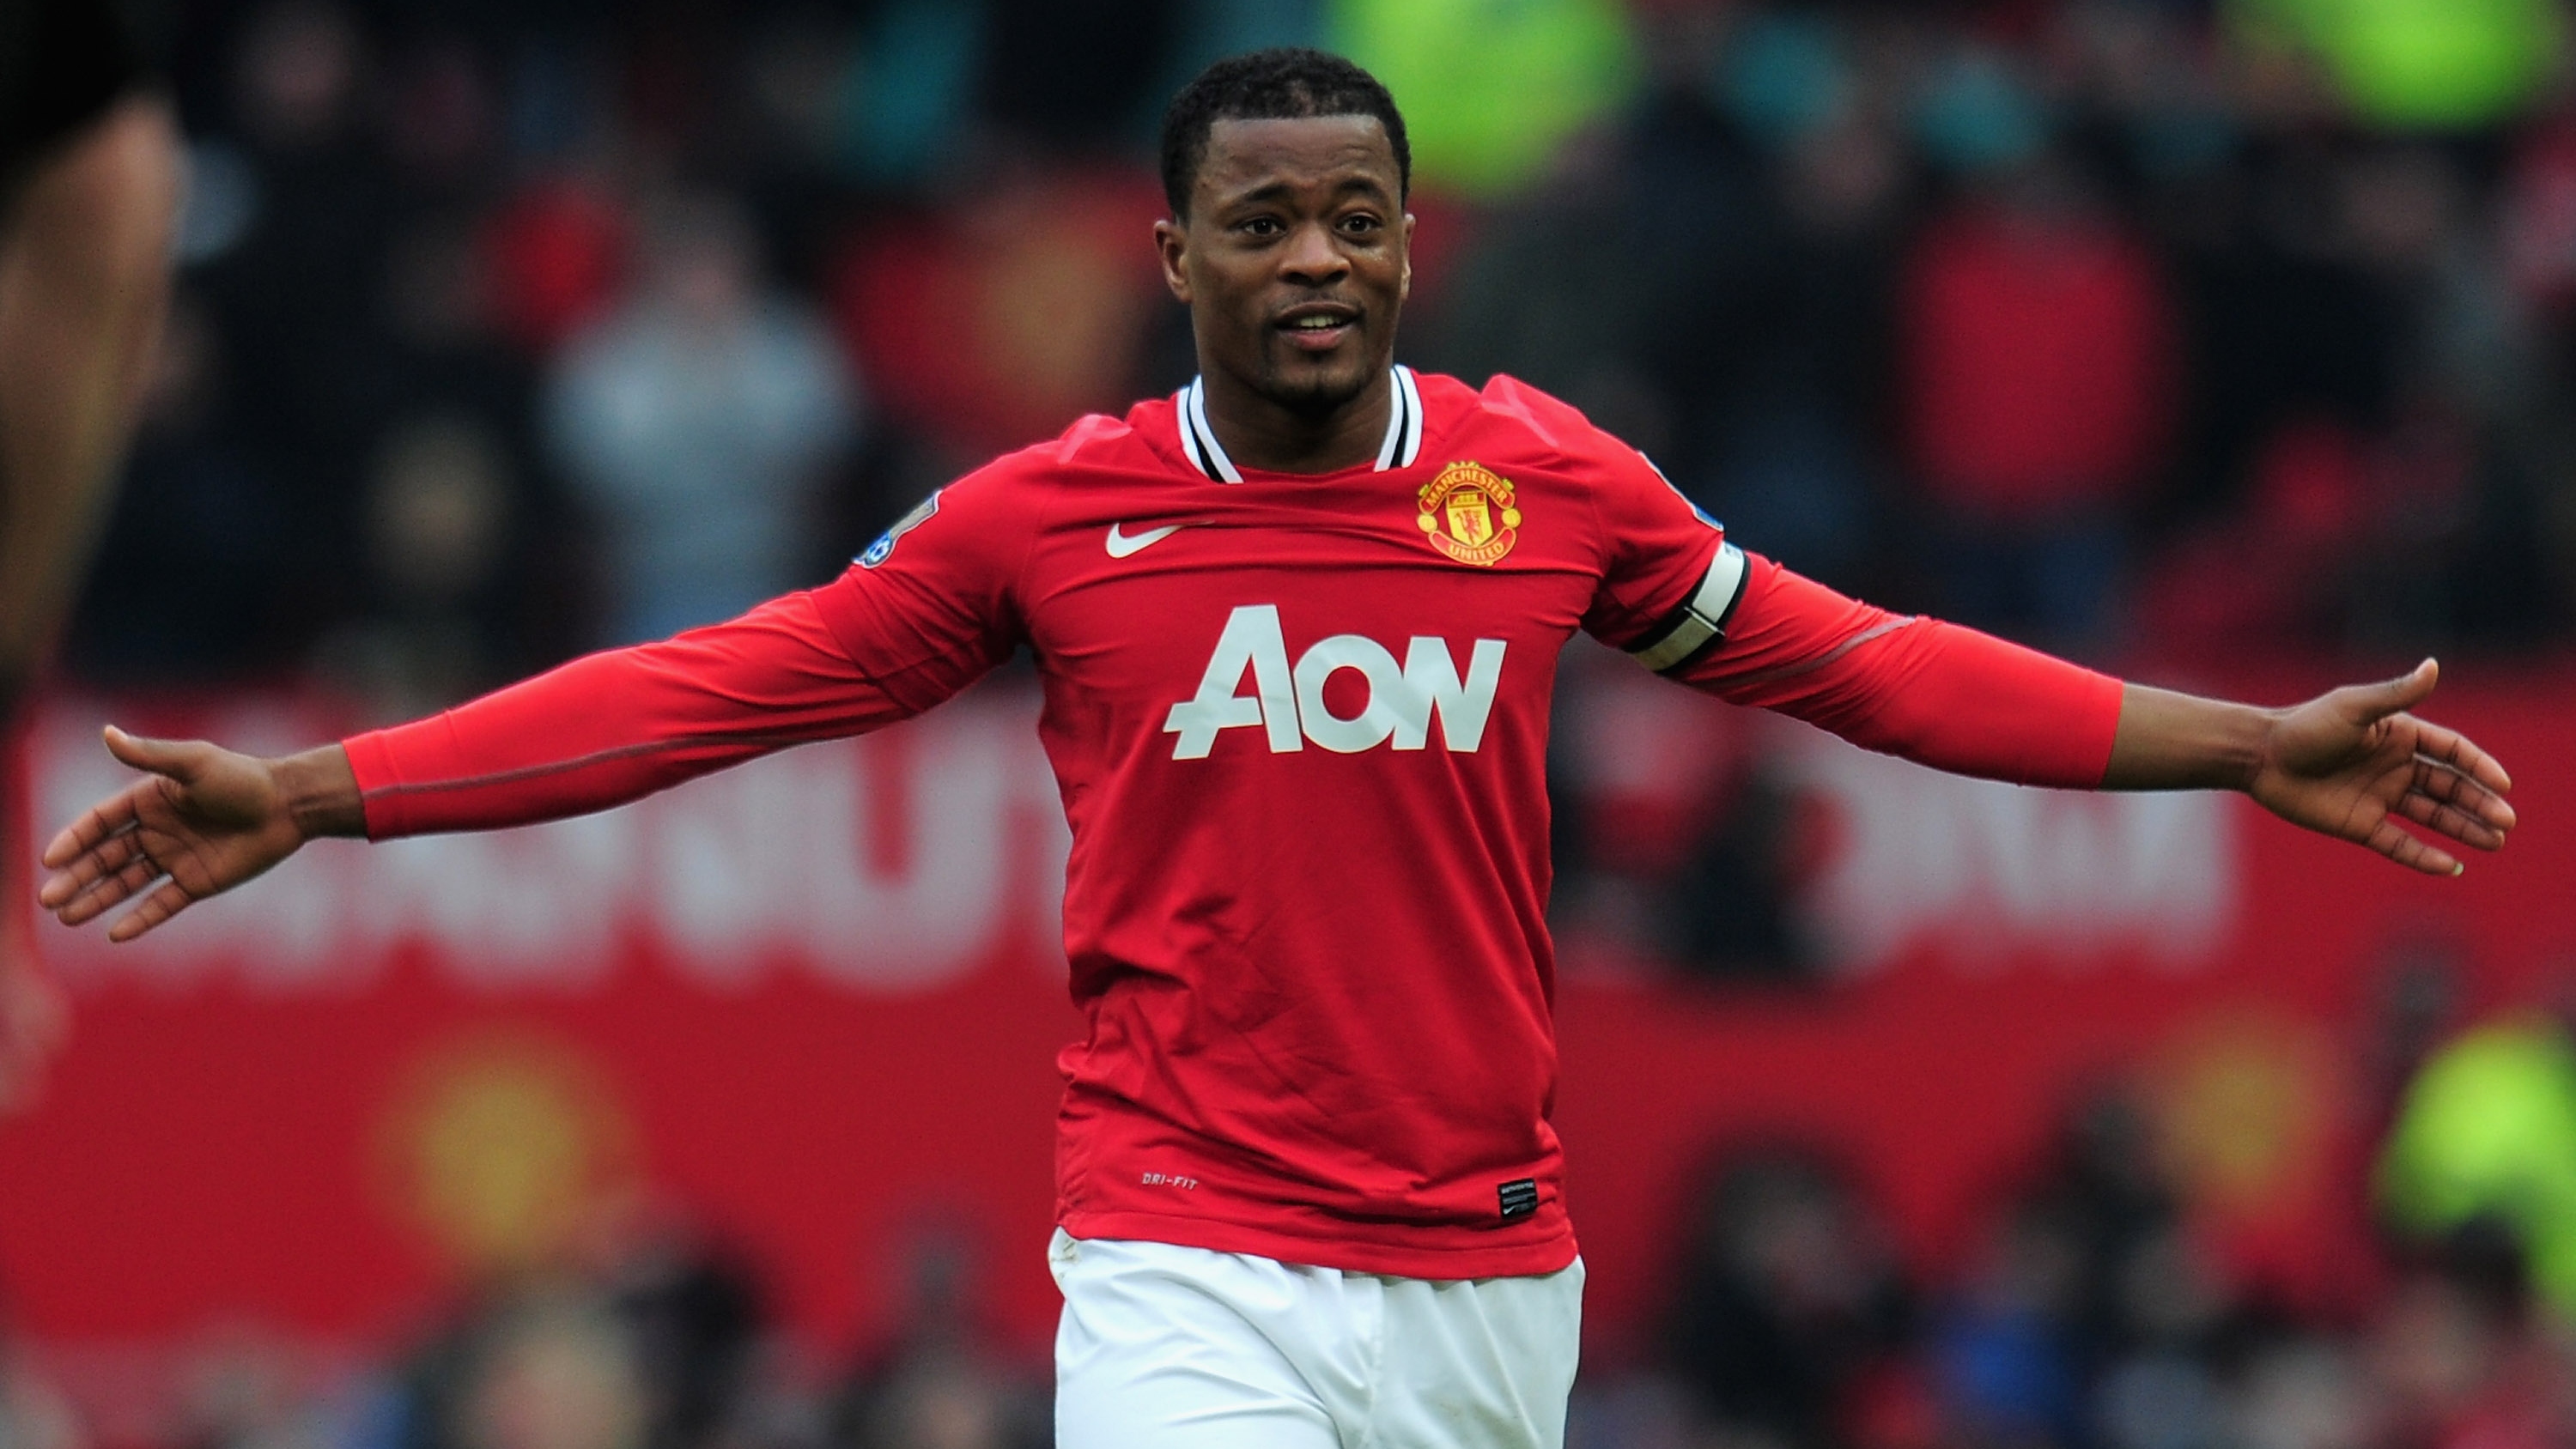 Evra: I’m not scared to say that I’ve begged for money